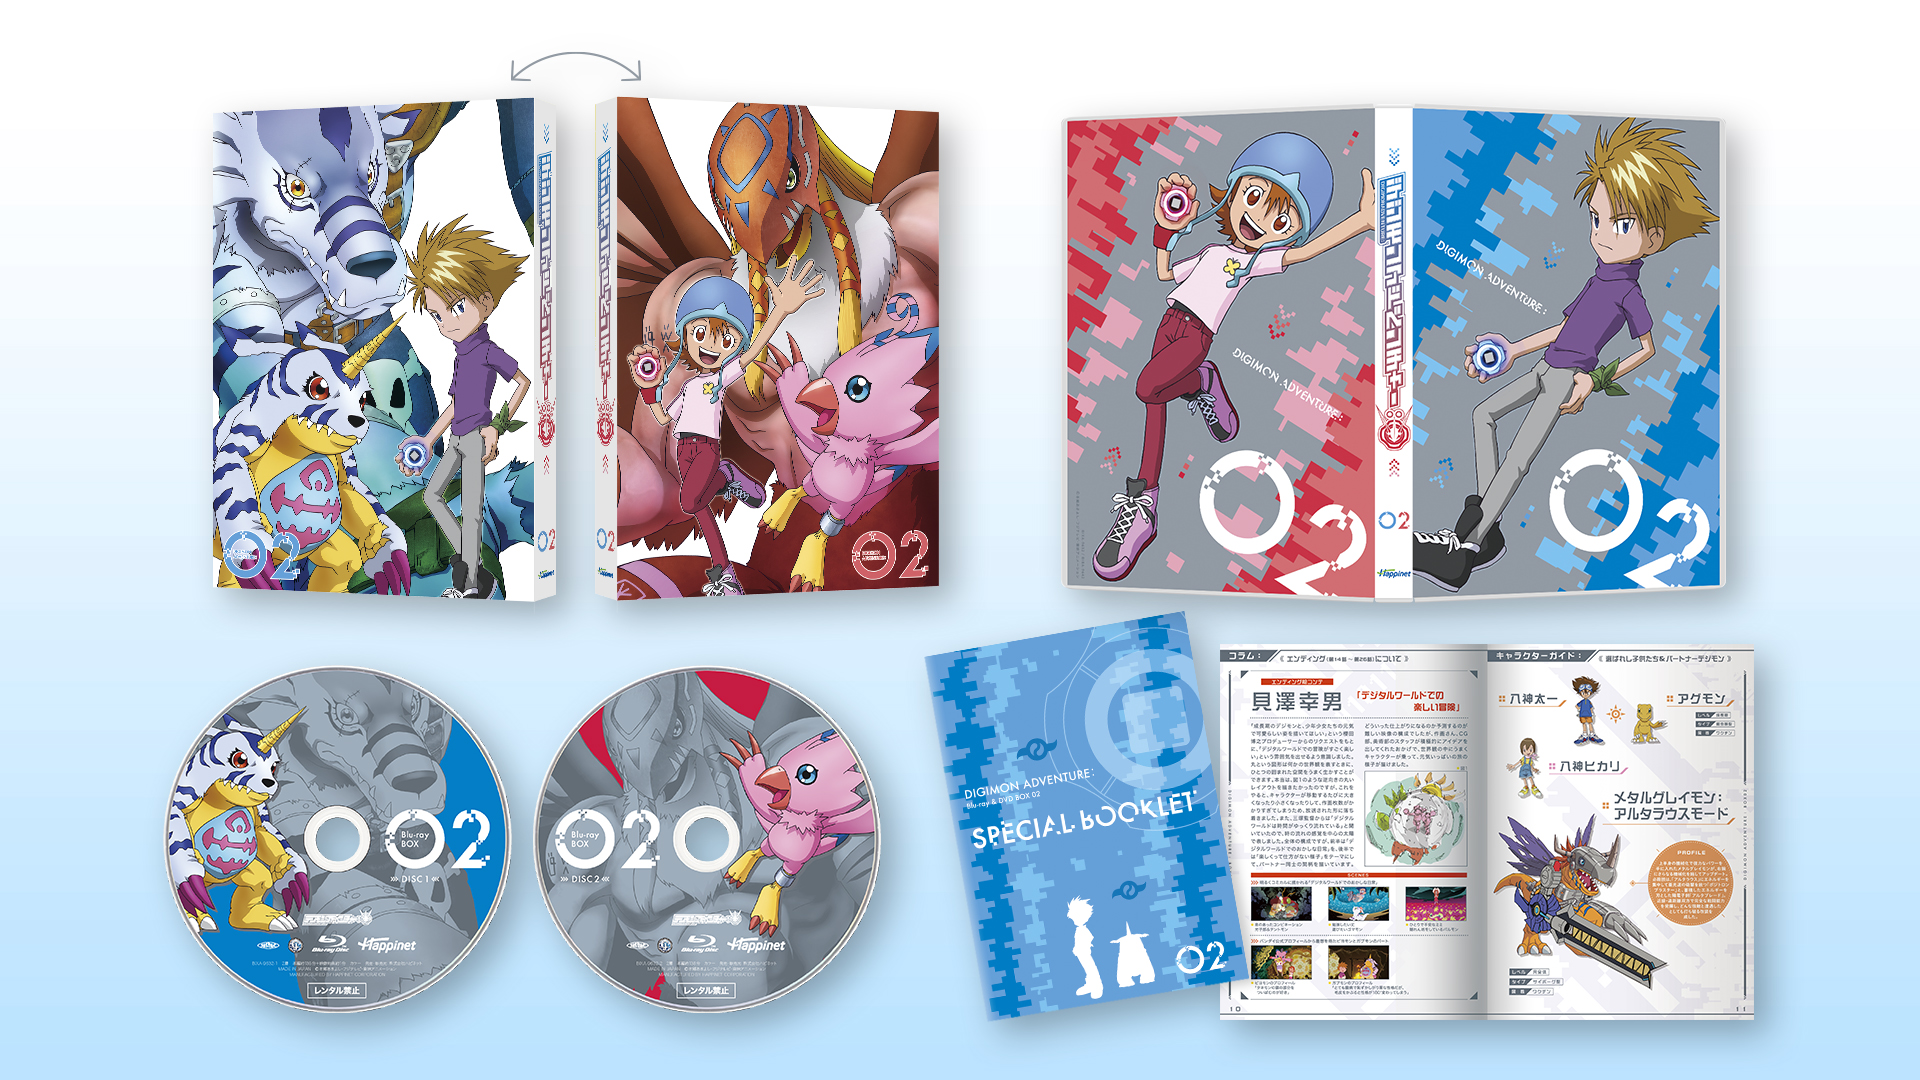 Digimon Adventure: Blu-ray/DVD Box 2 Packaging Preview & Product 